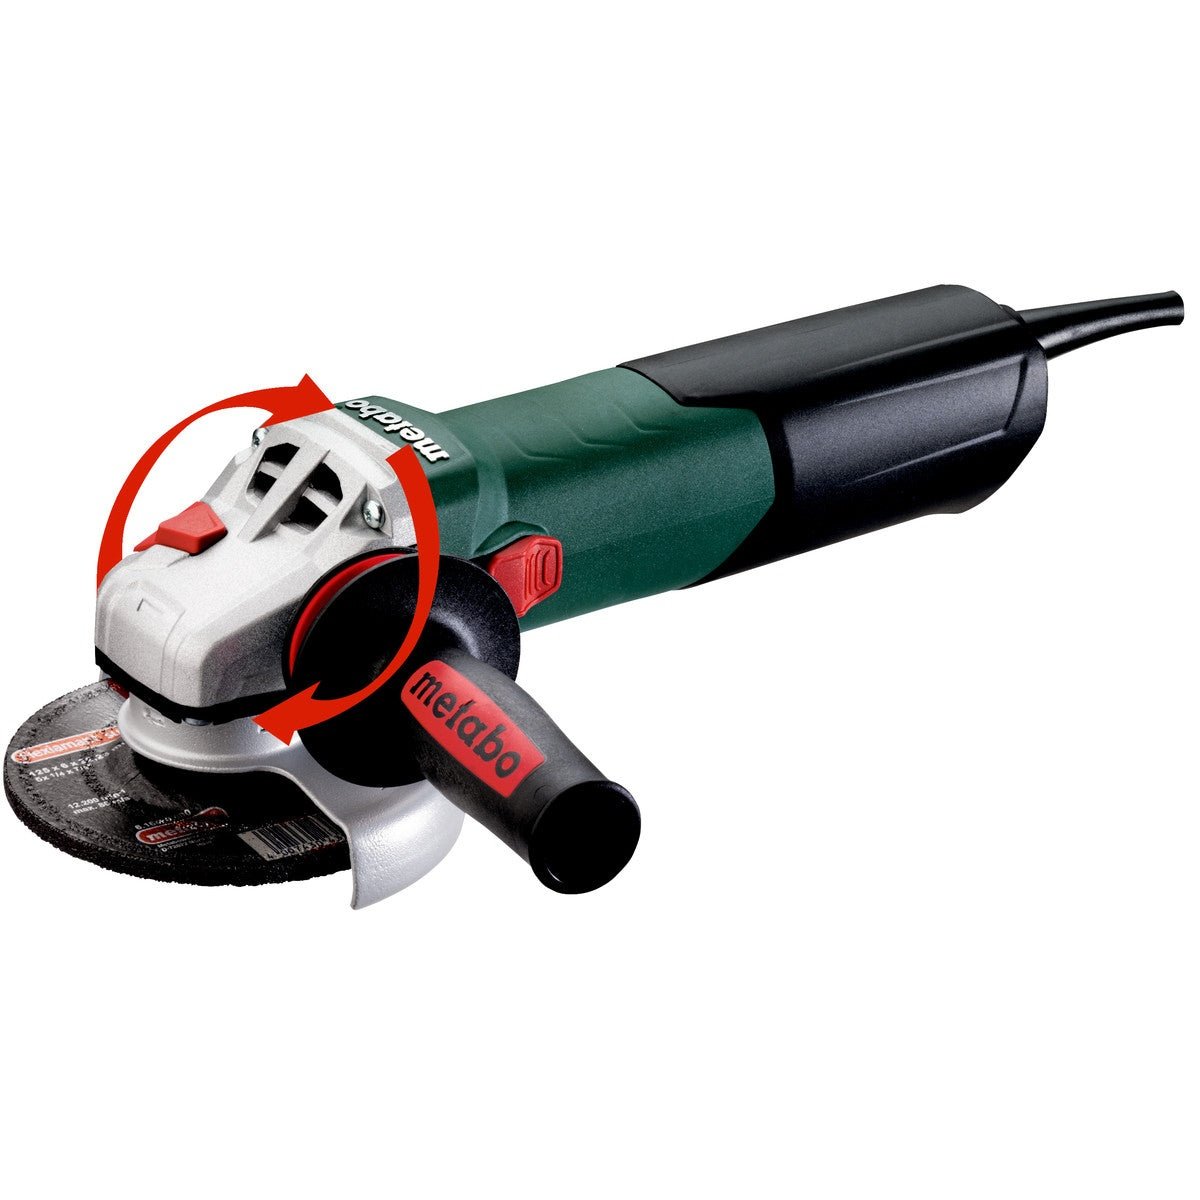 METABO 1900W 125MM VARIABLE SPEED ANGLE GRINDER WEV19-125QMBRUSH tool-junction-nz